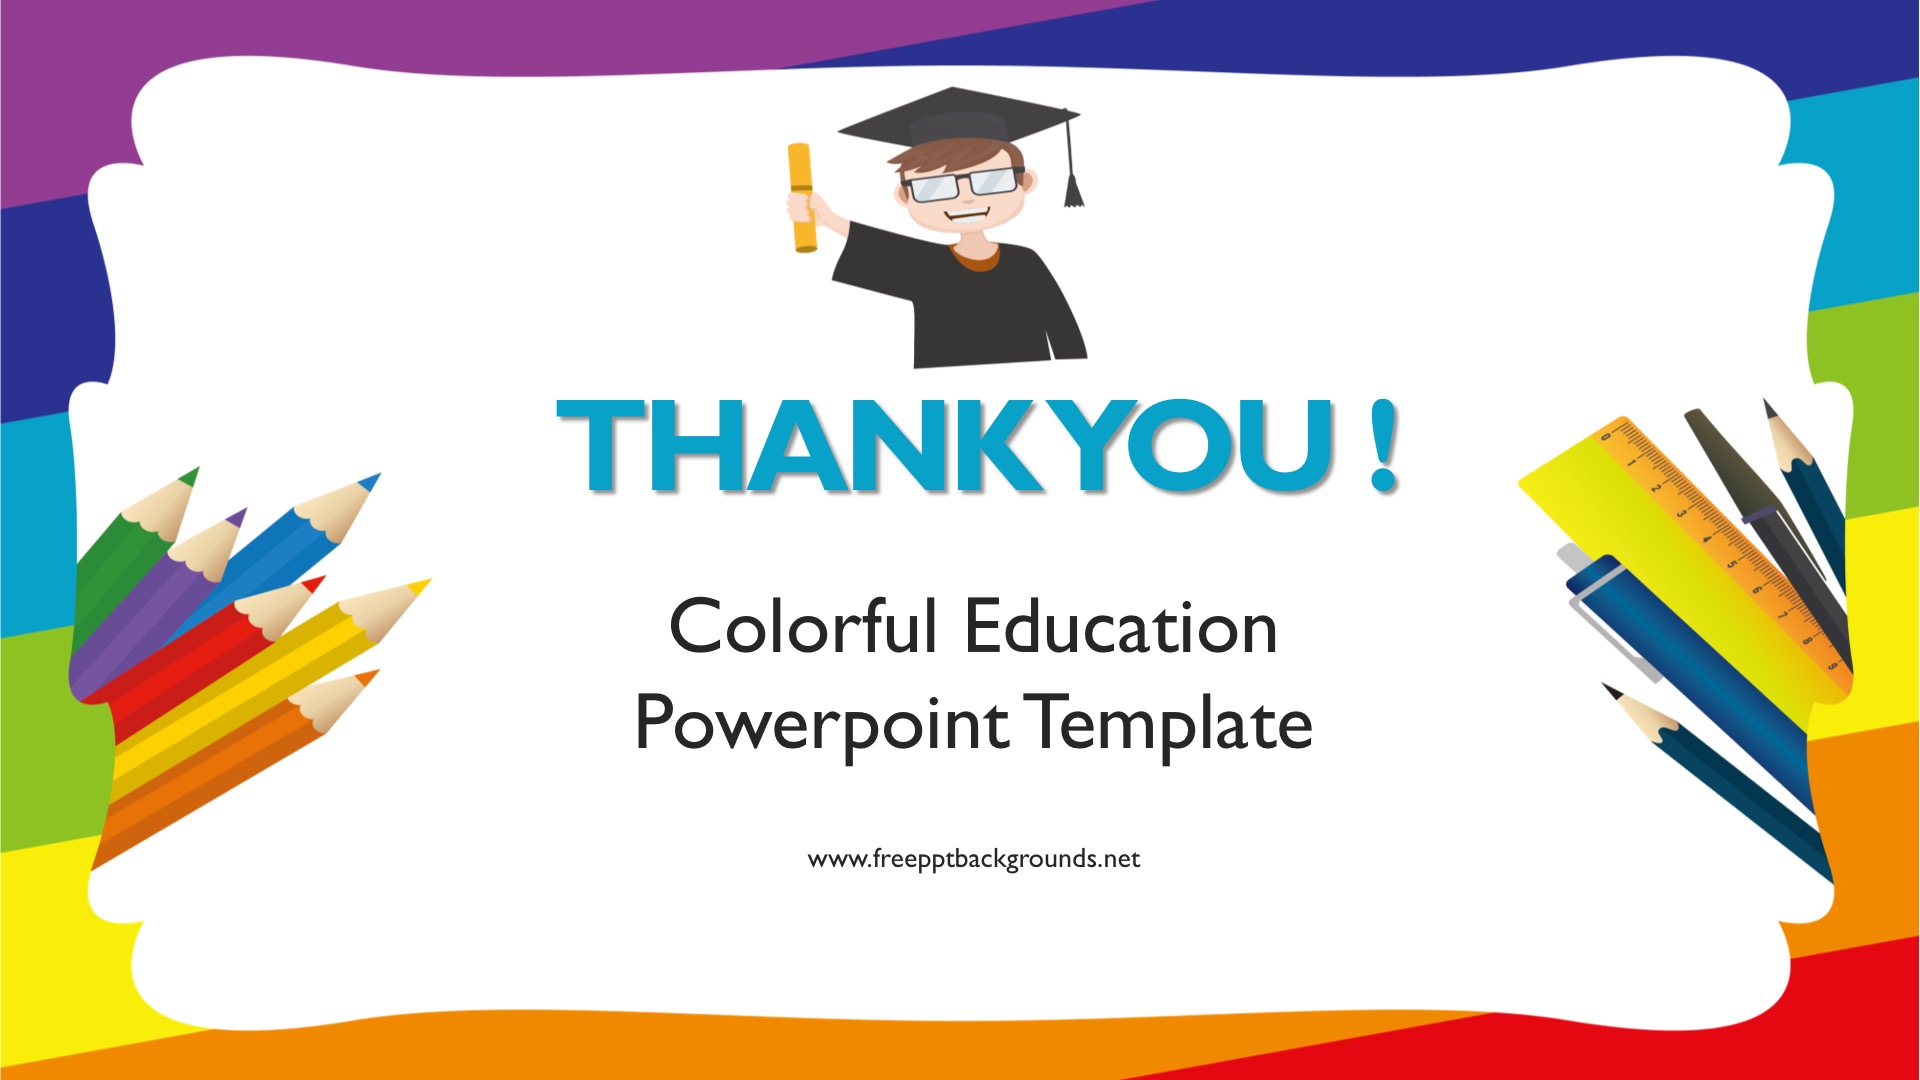 Colorful Education Powerpoint Templates Education Free PPT